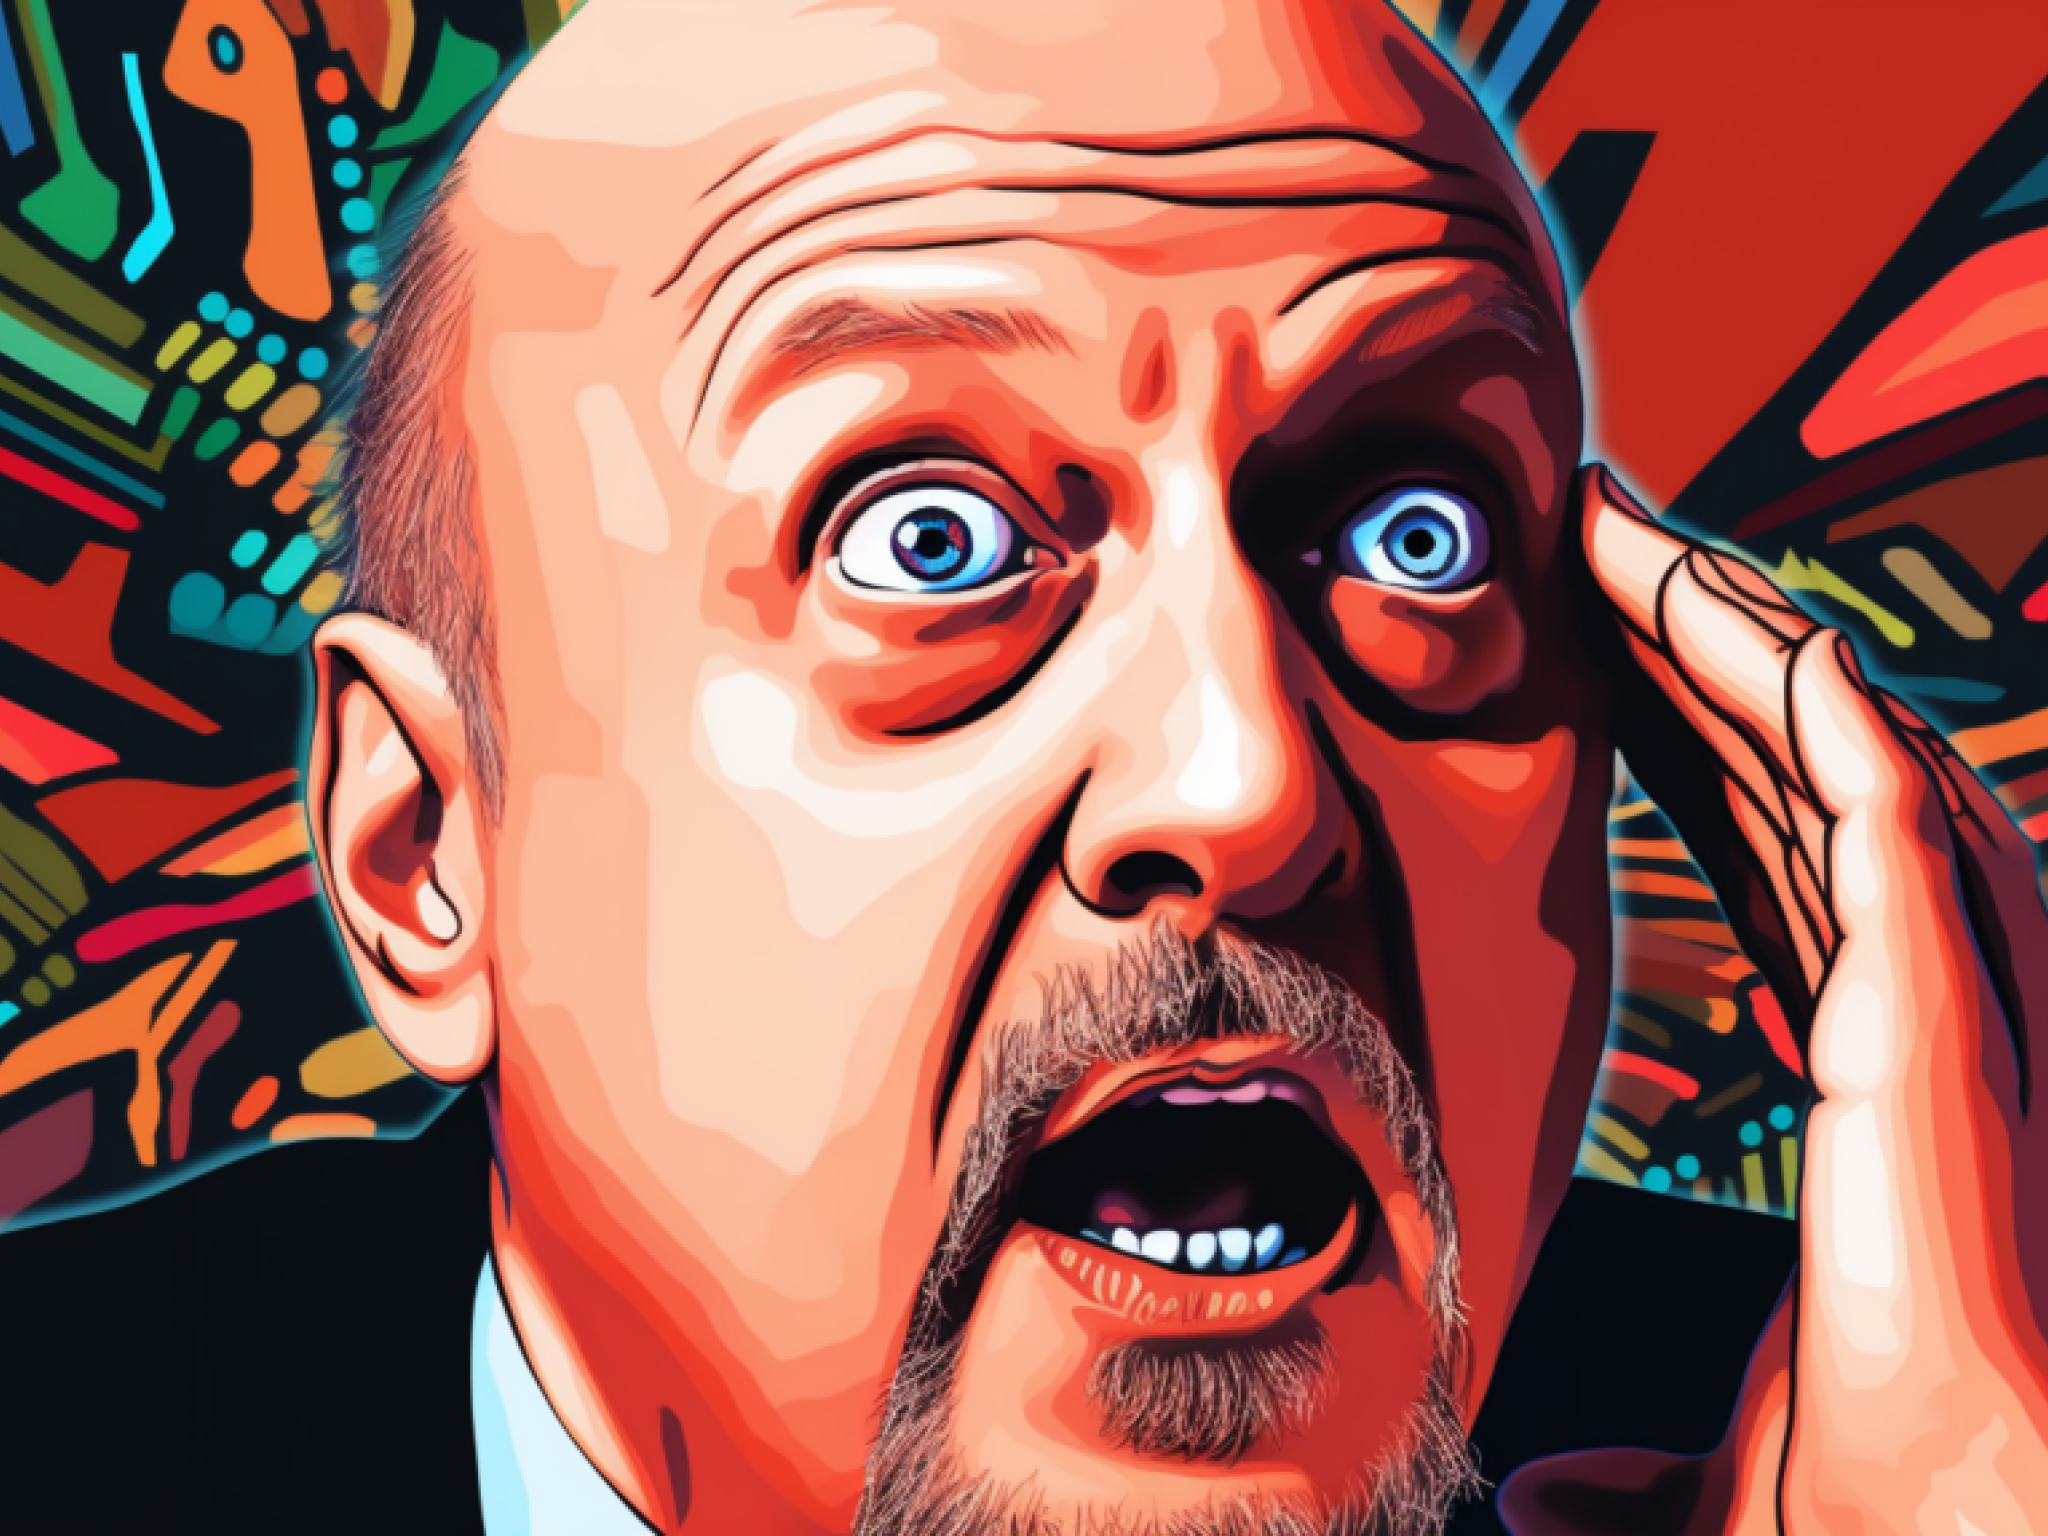  jim-cramer-bets-cash-strapped-amc-gamestop-may-issue-shares-to-capitalize-on-new-meme-stock-frenzy-it-makes-too-much-sense-not-to 